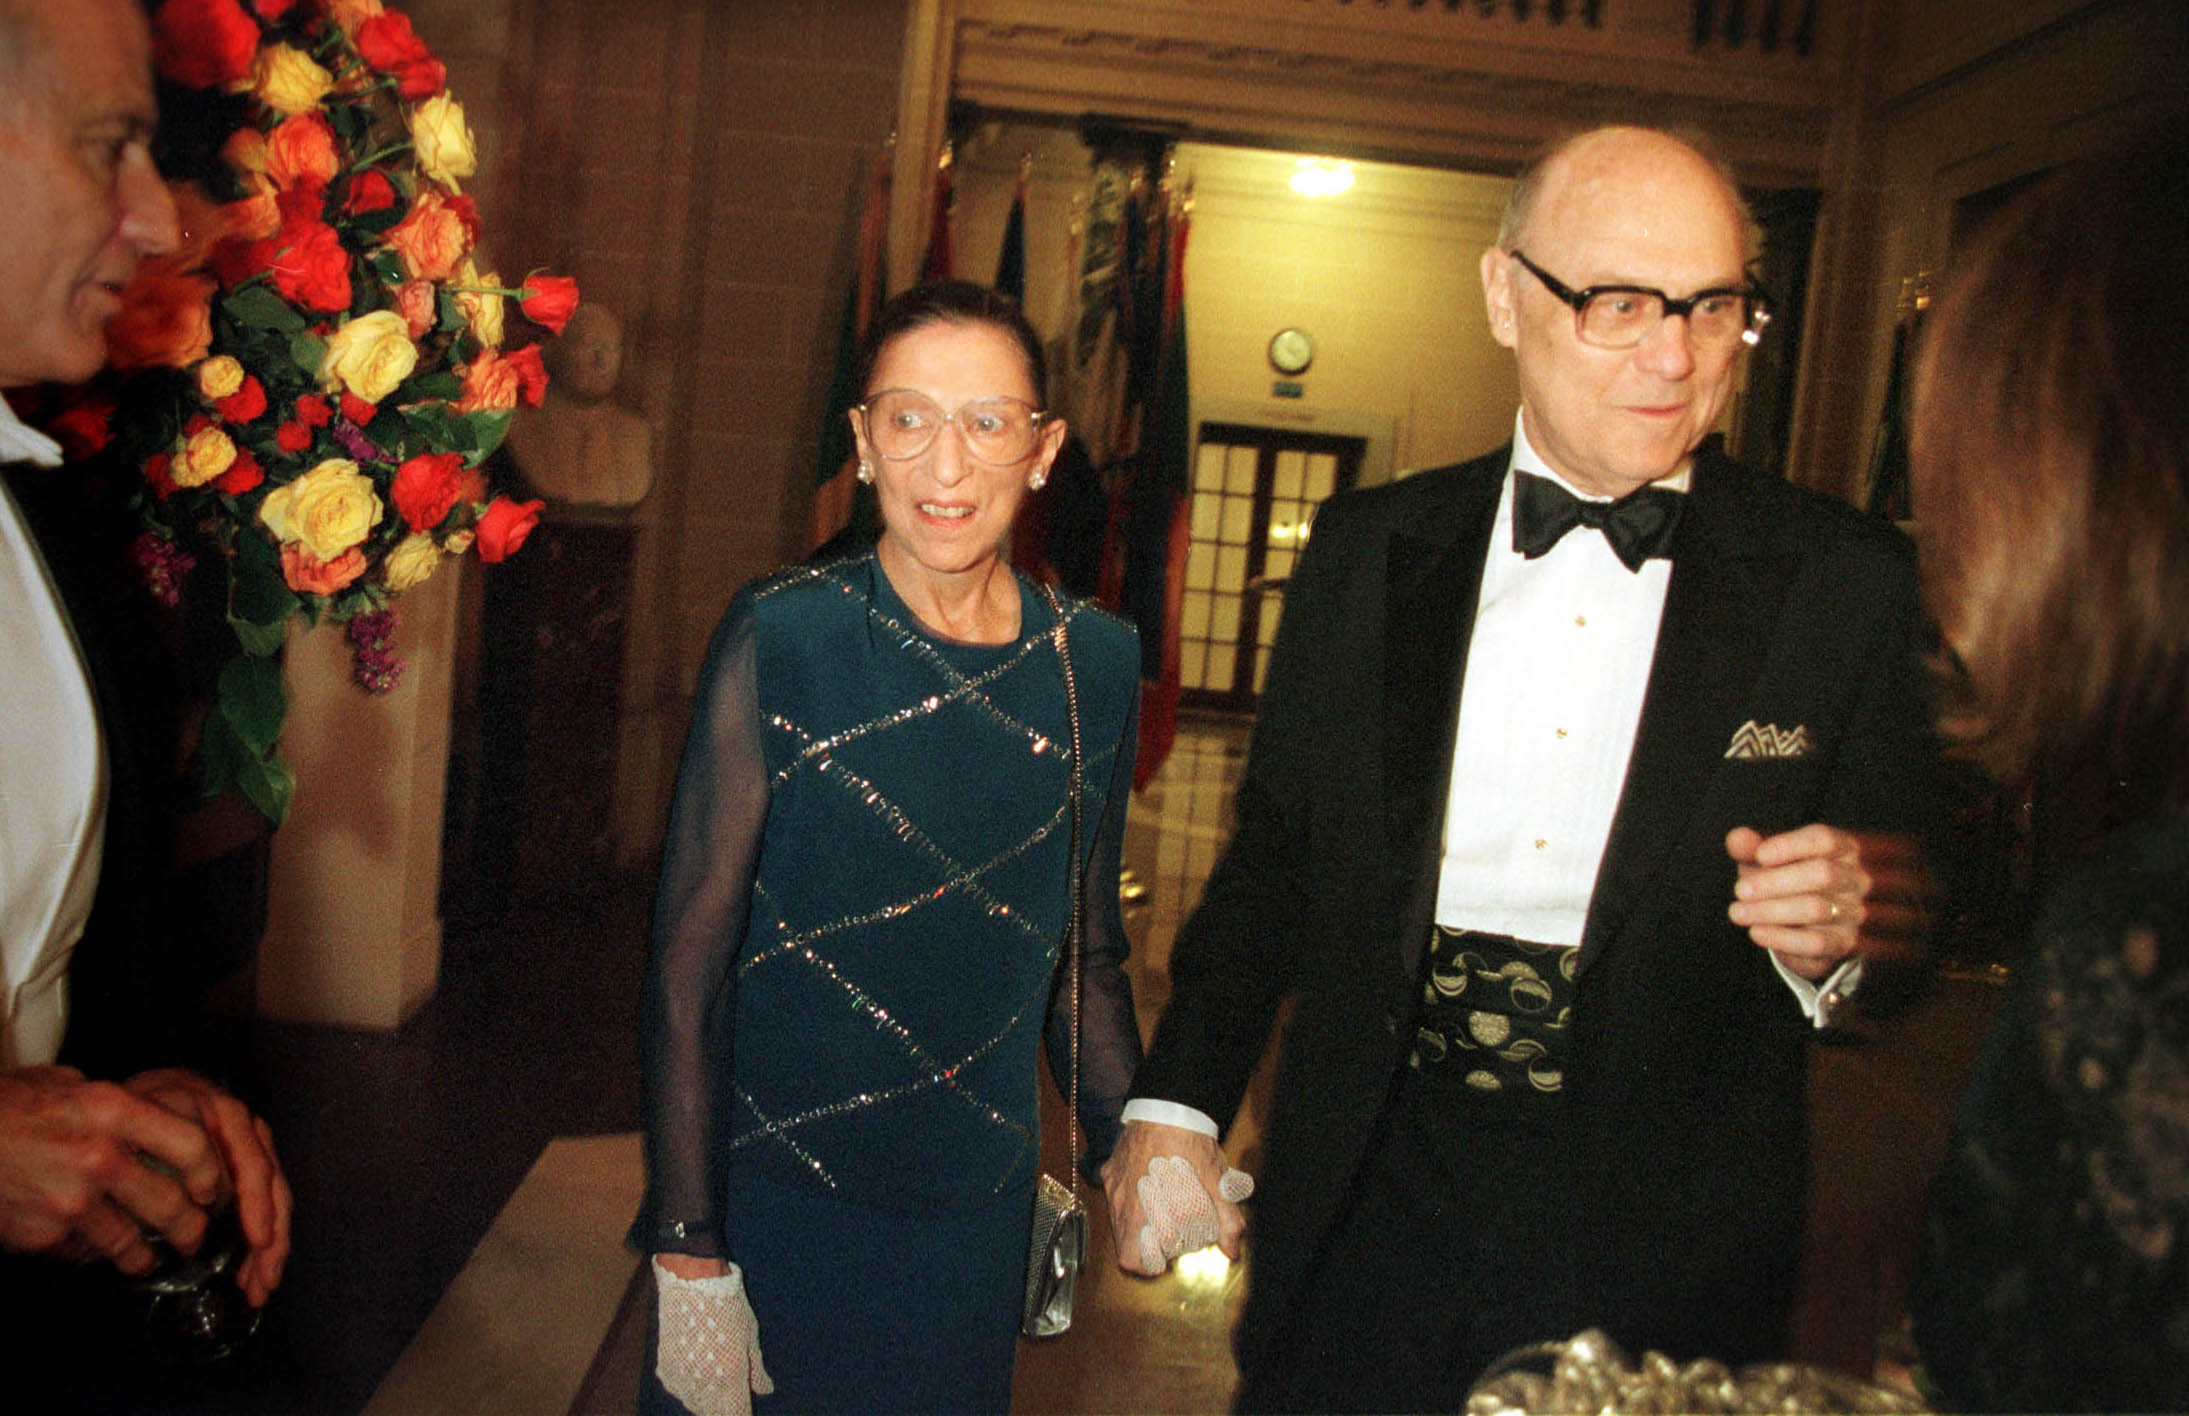 Supreme Court Justice Ruth Bader Ginsburg with her husband Martin Ginsburg on October 21 2000 in Washington D.C. | Source: Getty Images